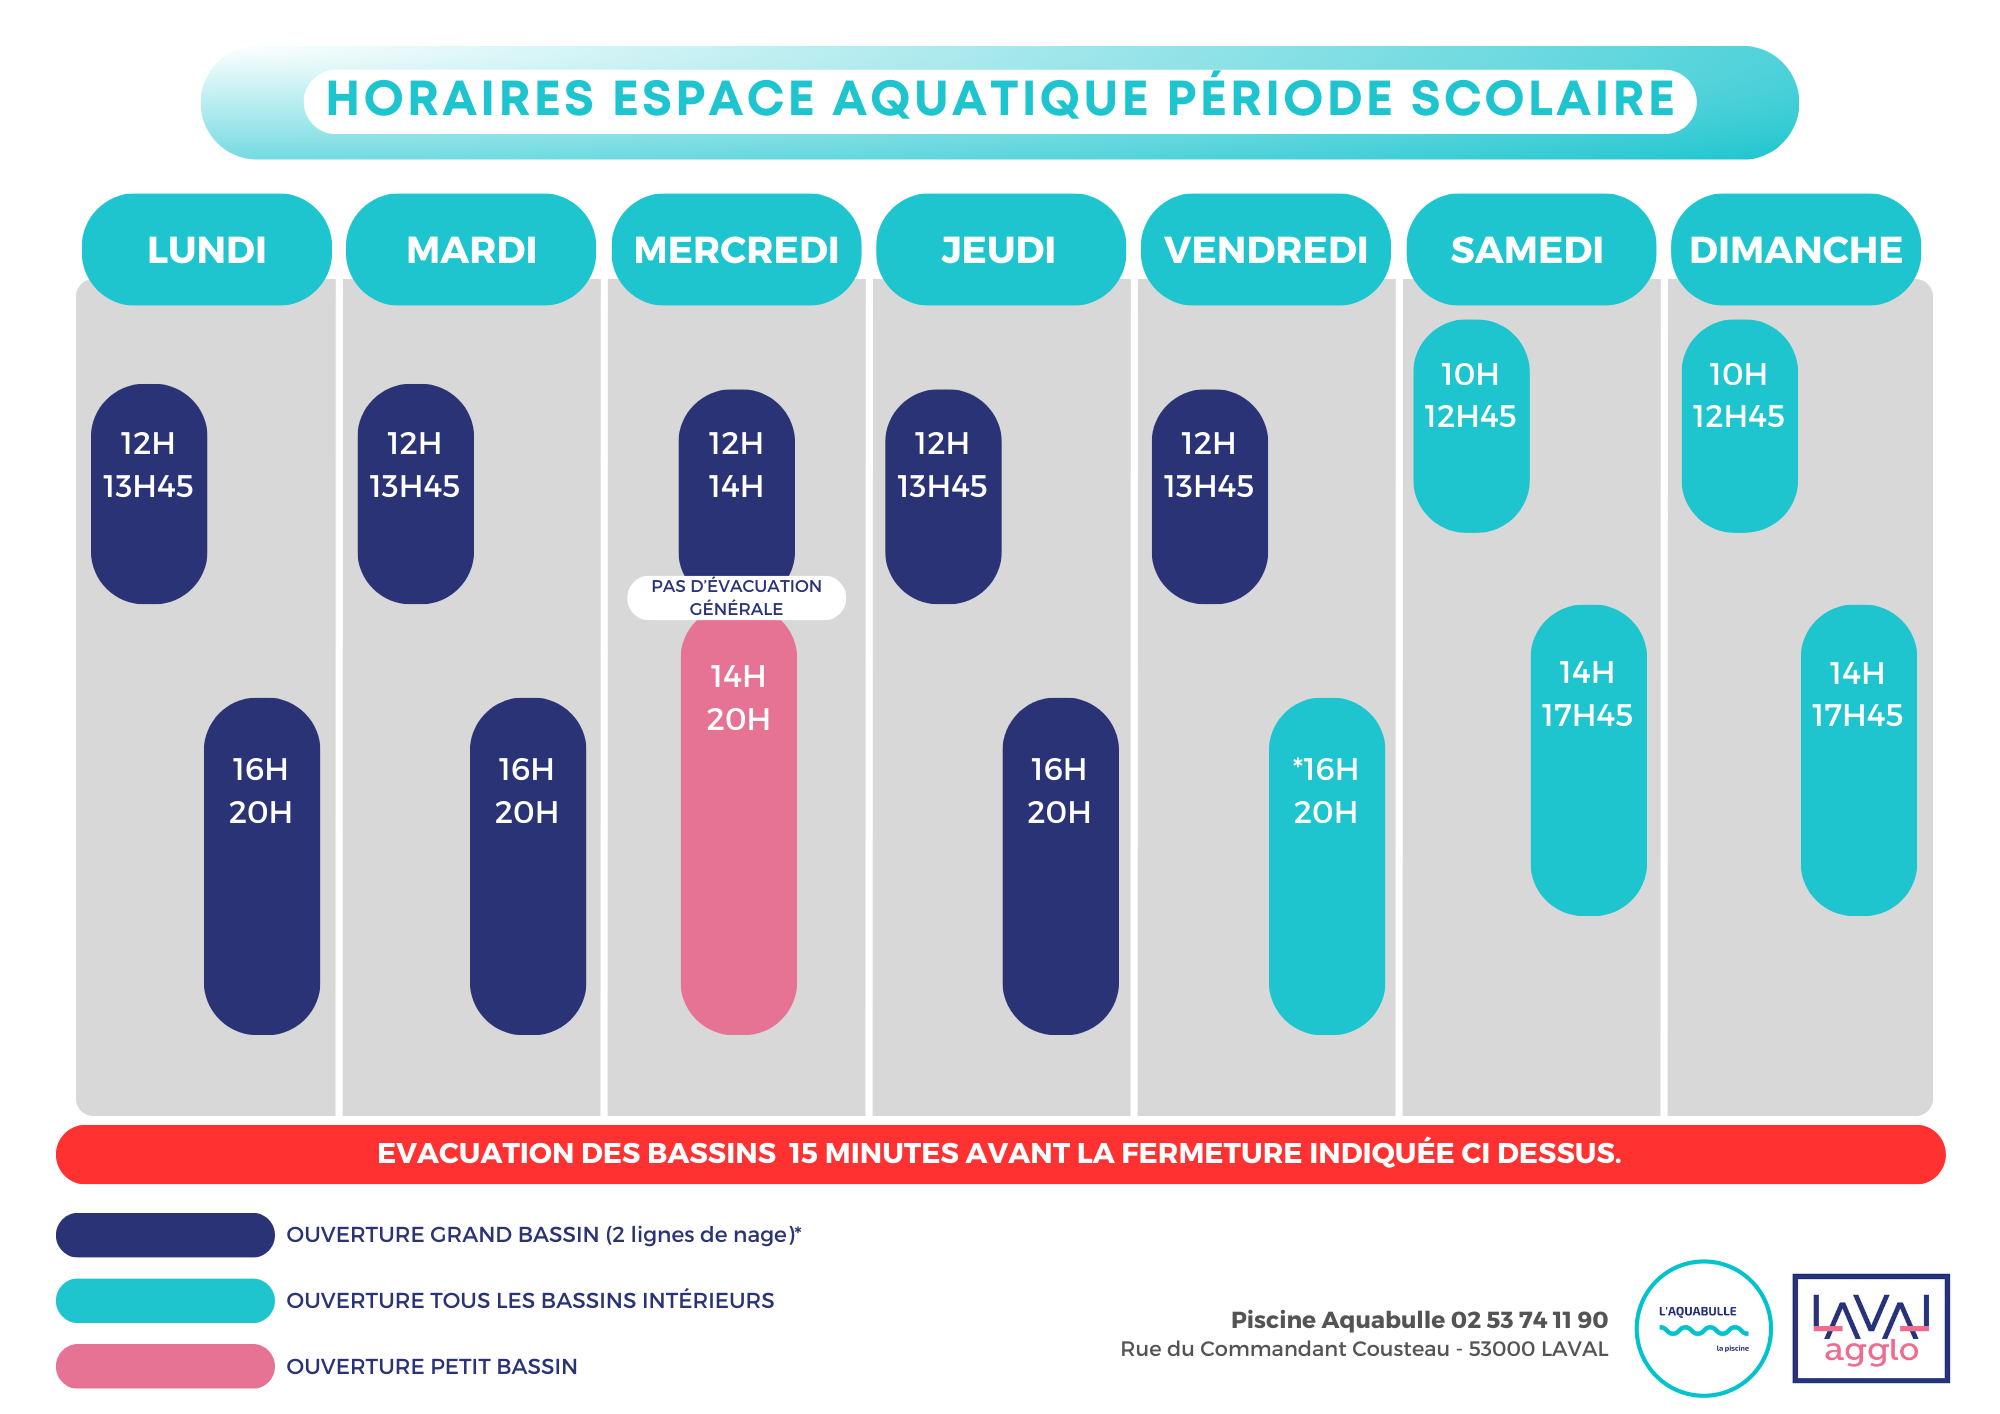 https://www.laval.fr/fileadmin/documents/SCT/HORAIRES_PISCINE_AQB_PERIODE_SCOLAIRE_3_.png